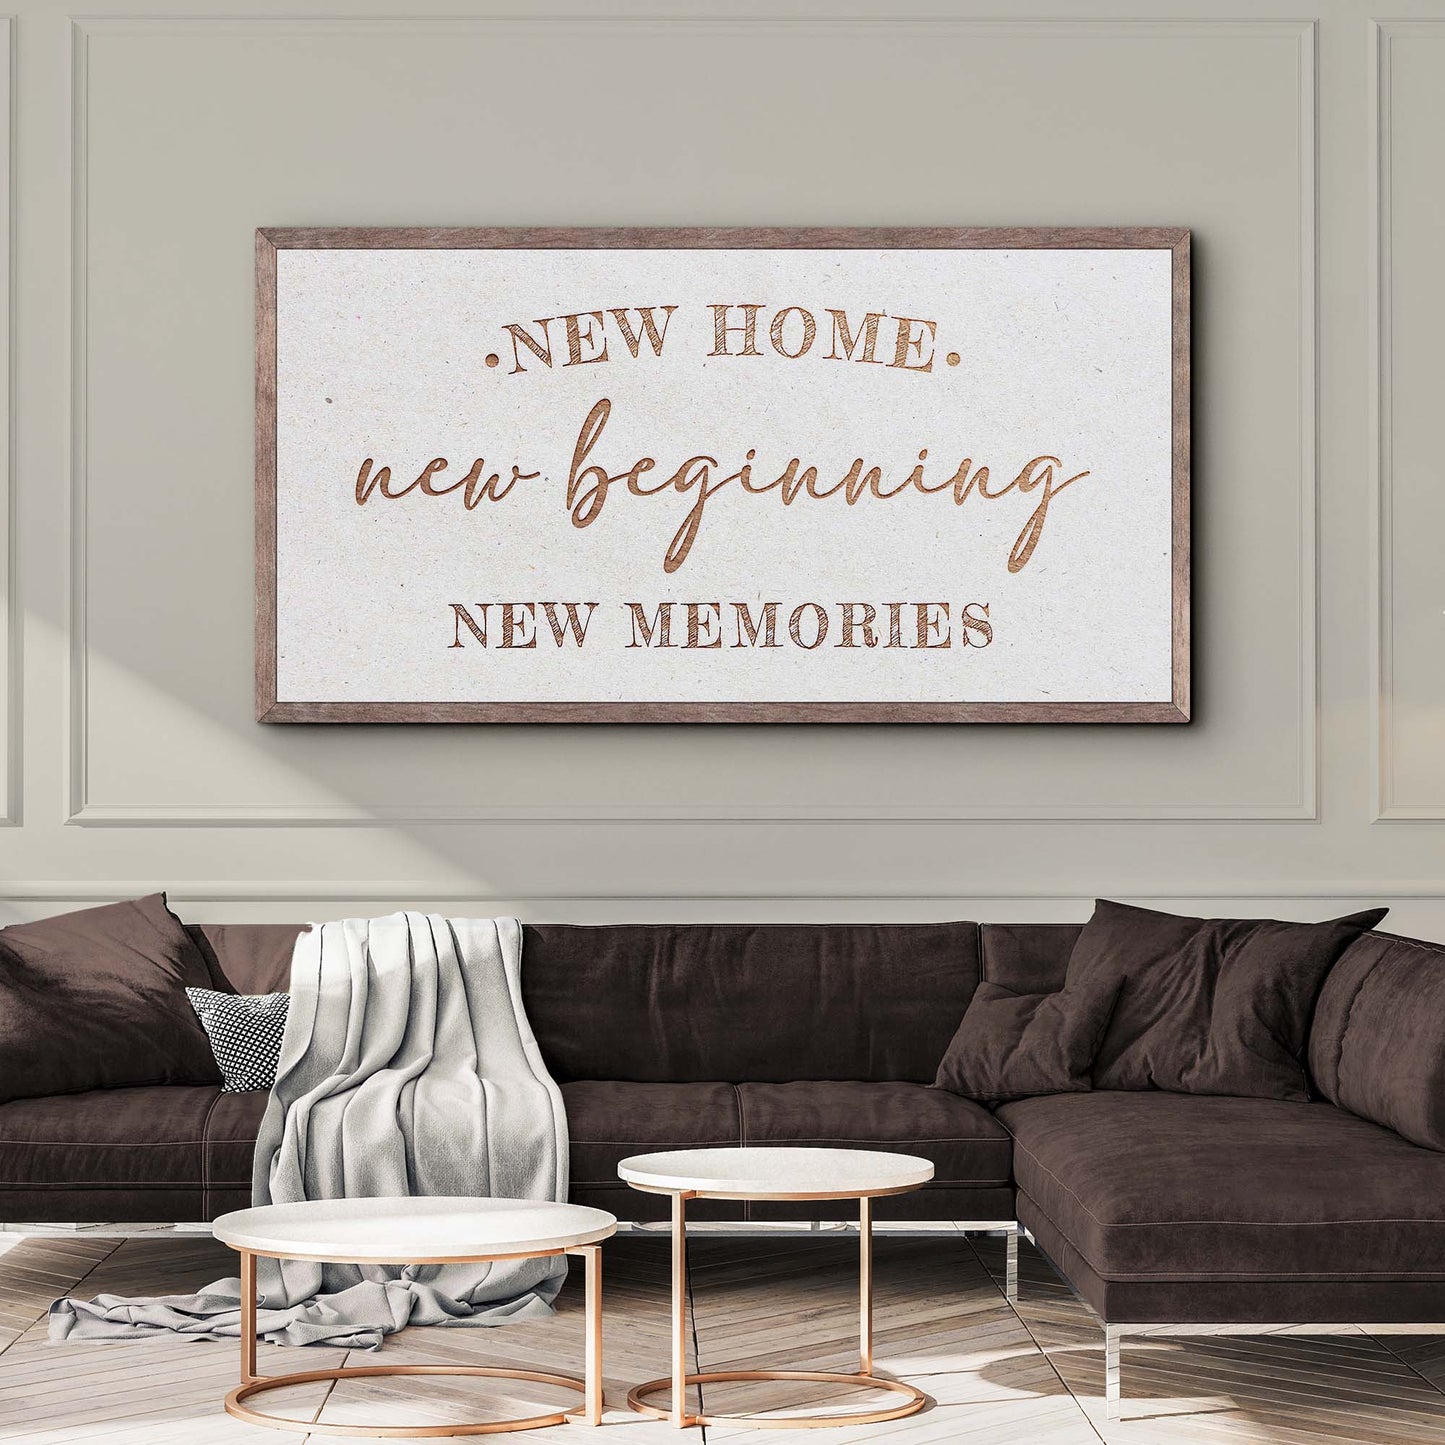 New Home New Beginning New Memories Sign  - Image by Tailored Canvases